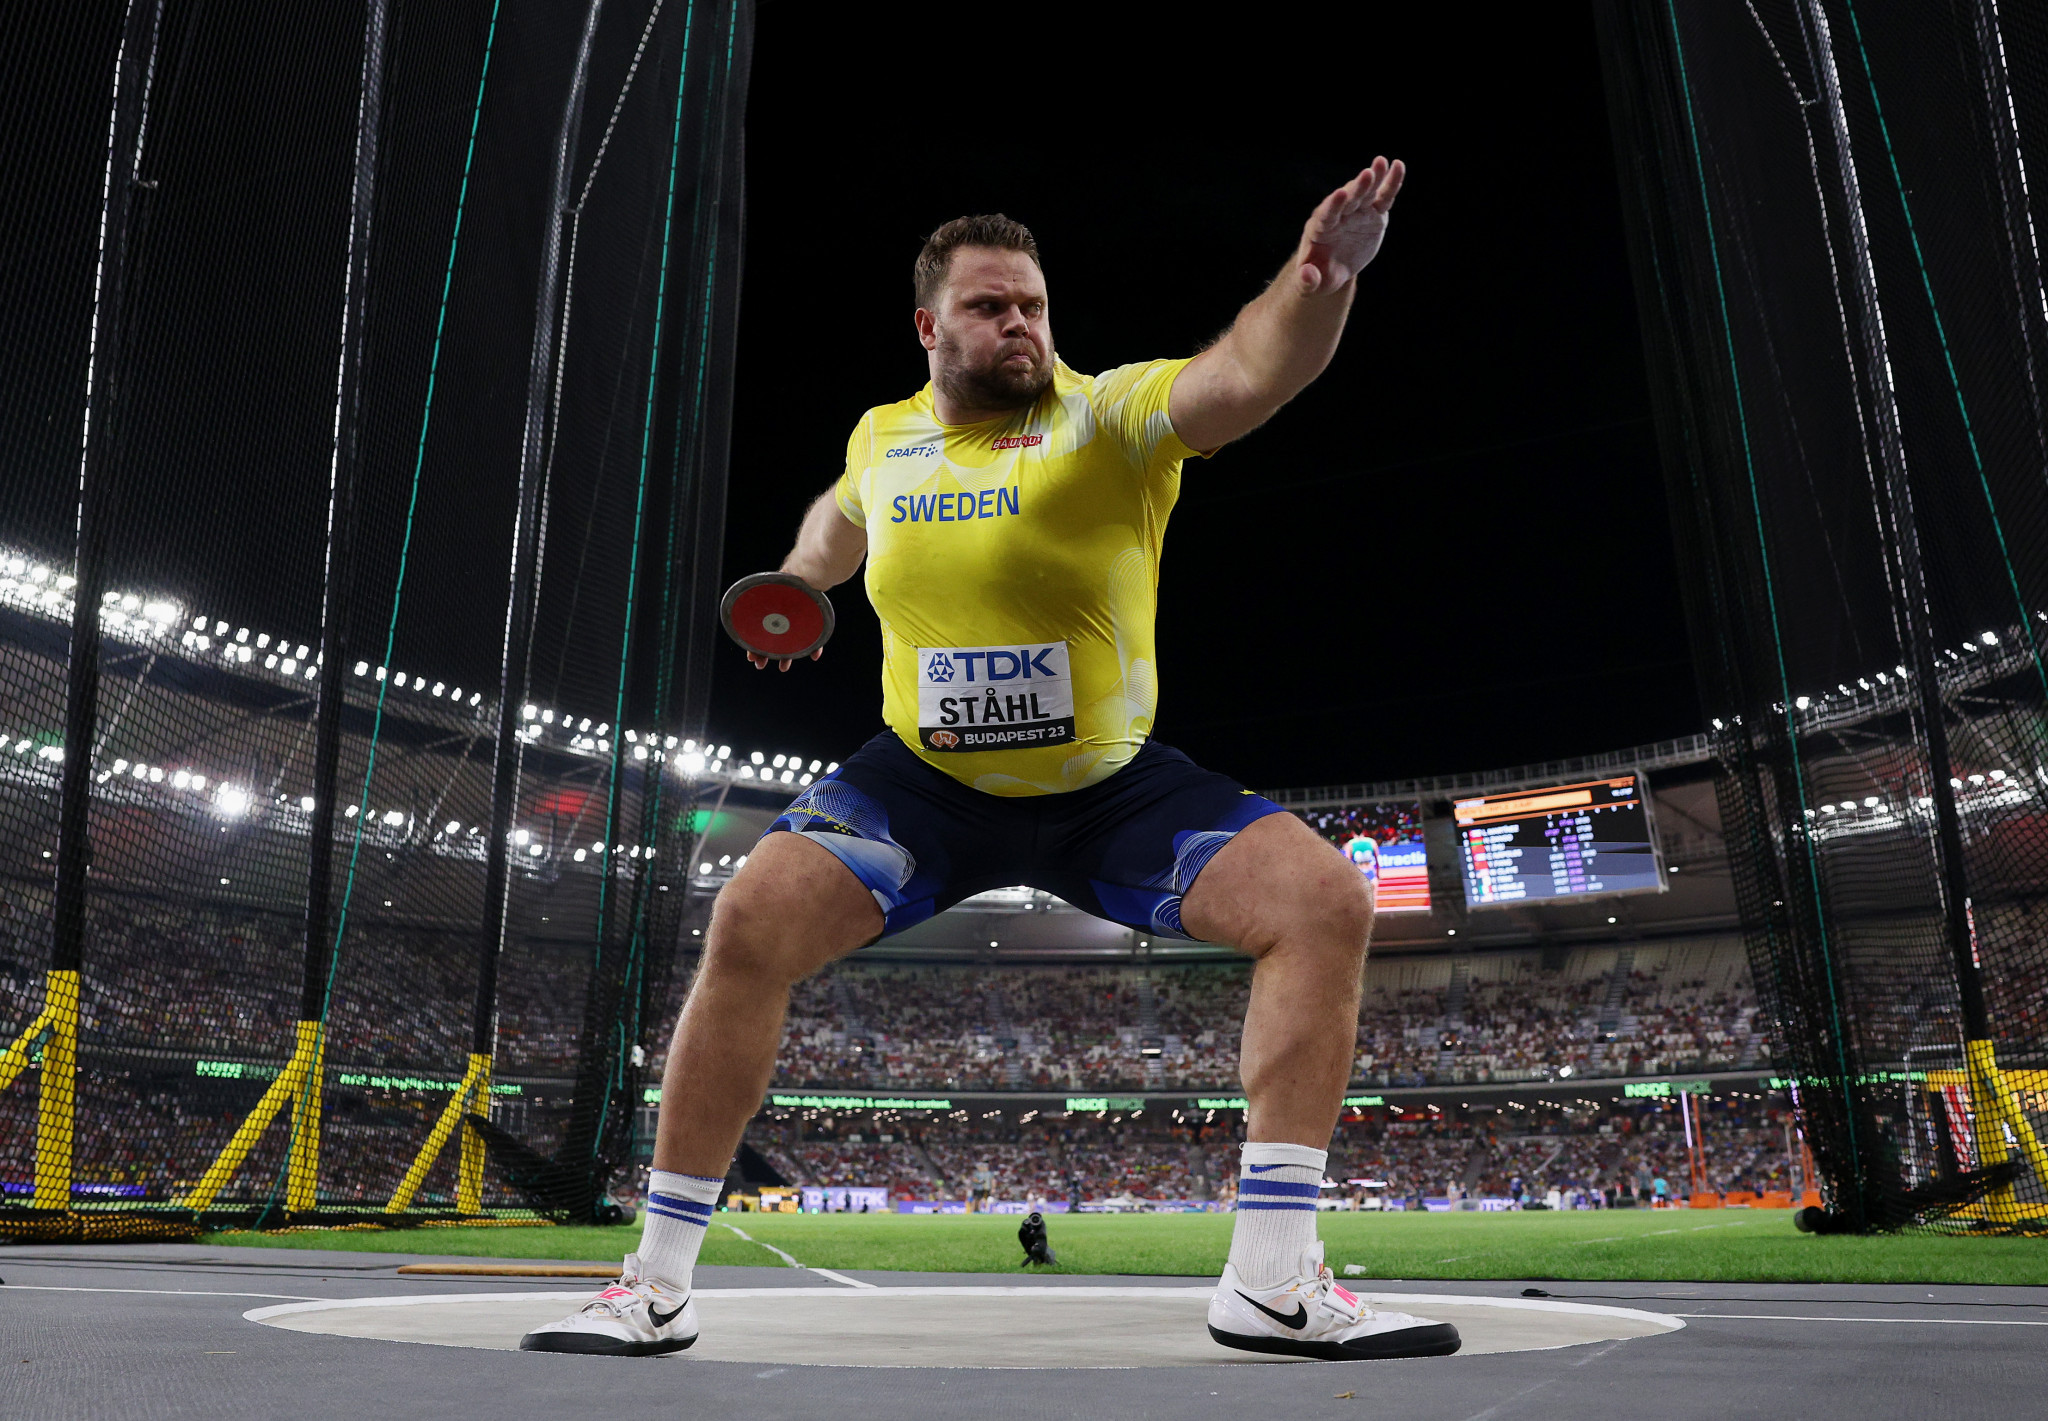 However, Sweden's Daniel Ståhl bettered it with his final attempt of 71.46m for a stunning second world title ©Getty Images